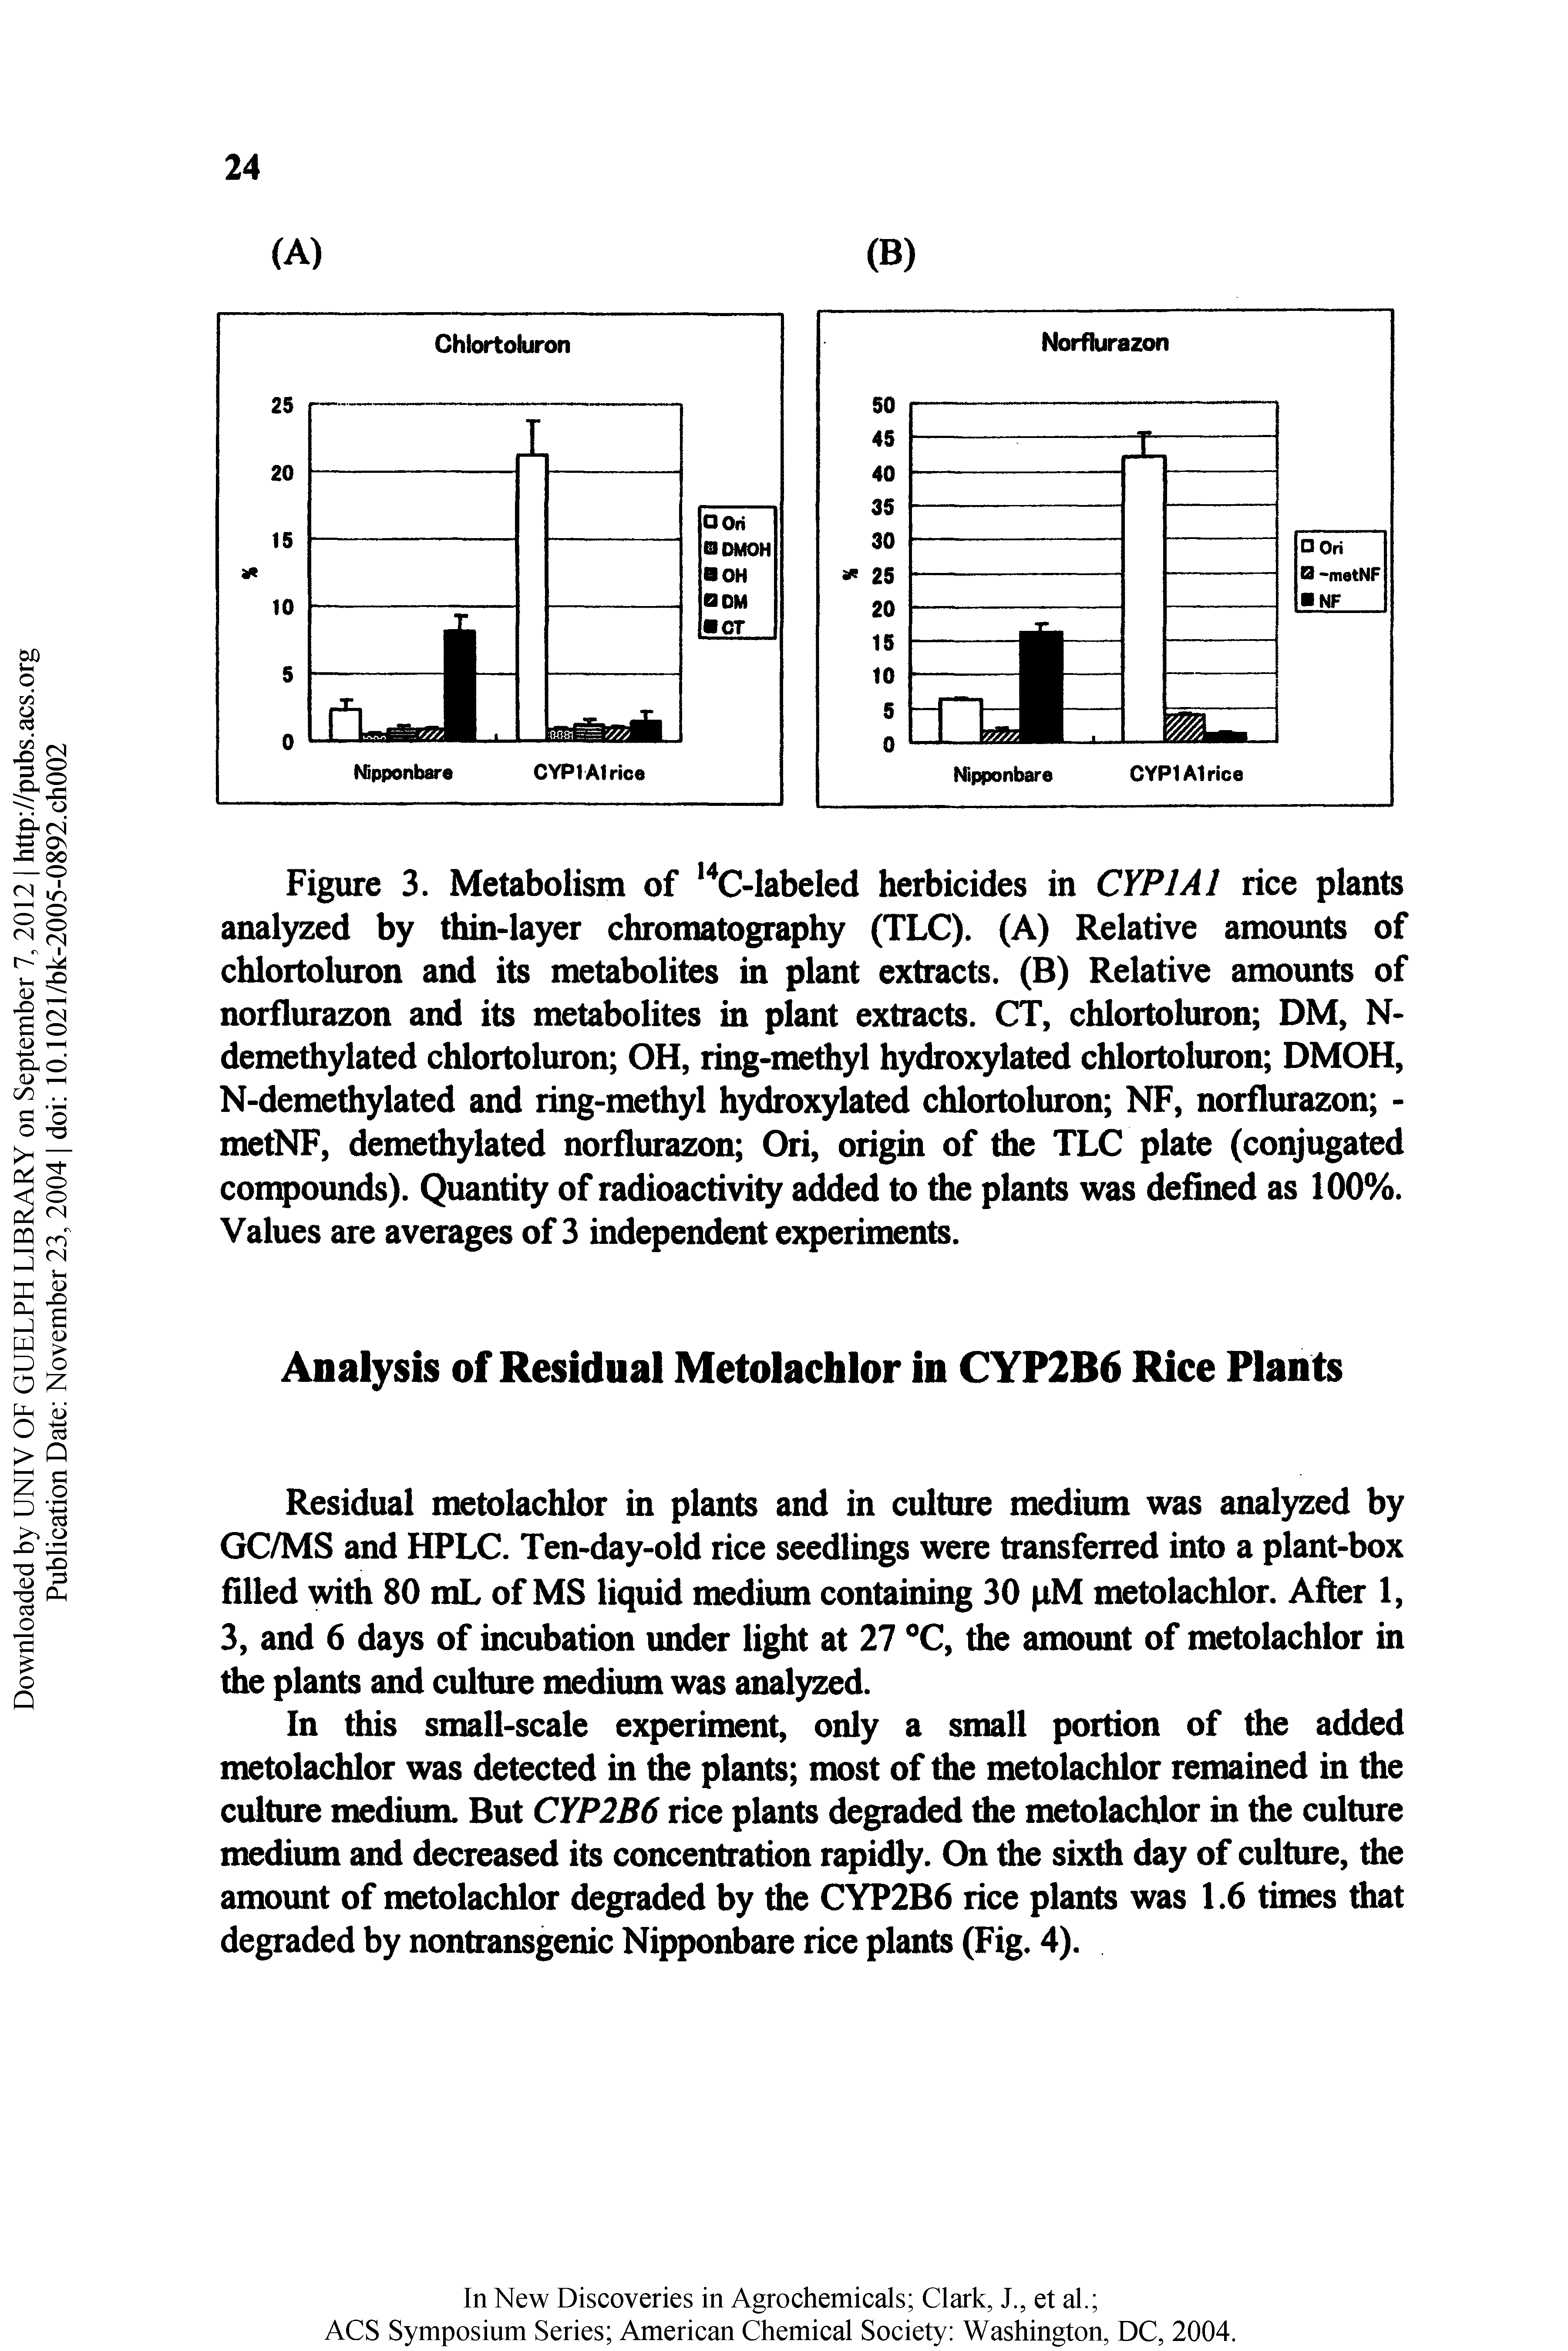 Figure 3. Metabolism of C-Iabeled herbicides in CYPIAI rice plants analyzed by thin-layer chromatography (TLC). (A) Relative amoimts of chlortoluron and its metabolites in plant extracts. (B) Relative amounts of norflurazon and its metabolites in plant extracts. CT, chlortoluron DM, N-demethylated chlortoluron OH, ring-methyl hydroxylated chlortohnon DMOH, N-demethylated and ring-methyl hydroxylated chlortoluron NF, norflurazon -metNF, demethylated norflurazon Ori, origin of the TLC plate (conjugated confounds). Quantity of radioactivity added to the plants was defined as 100%. Values are averages of 3 independent experiments.